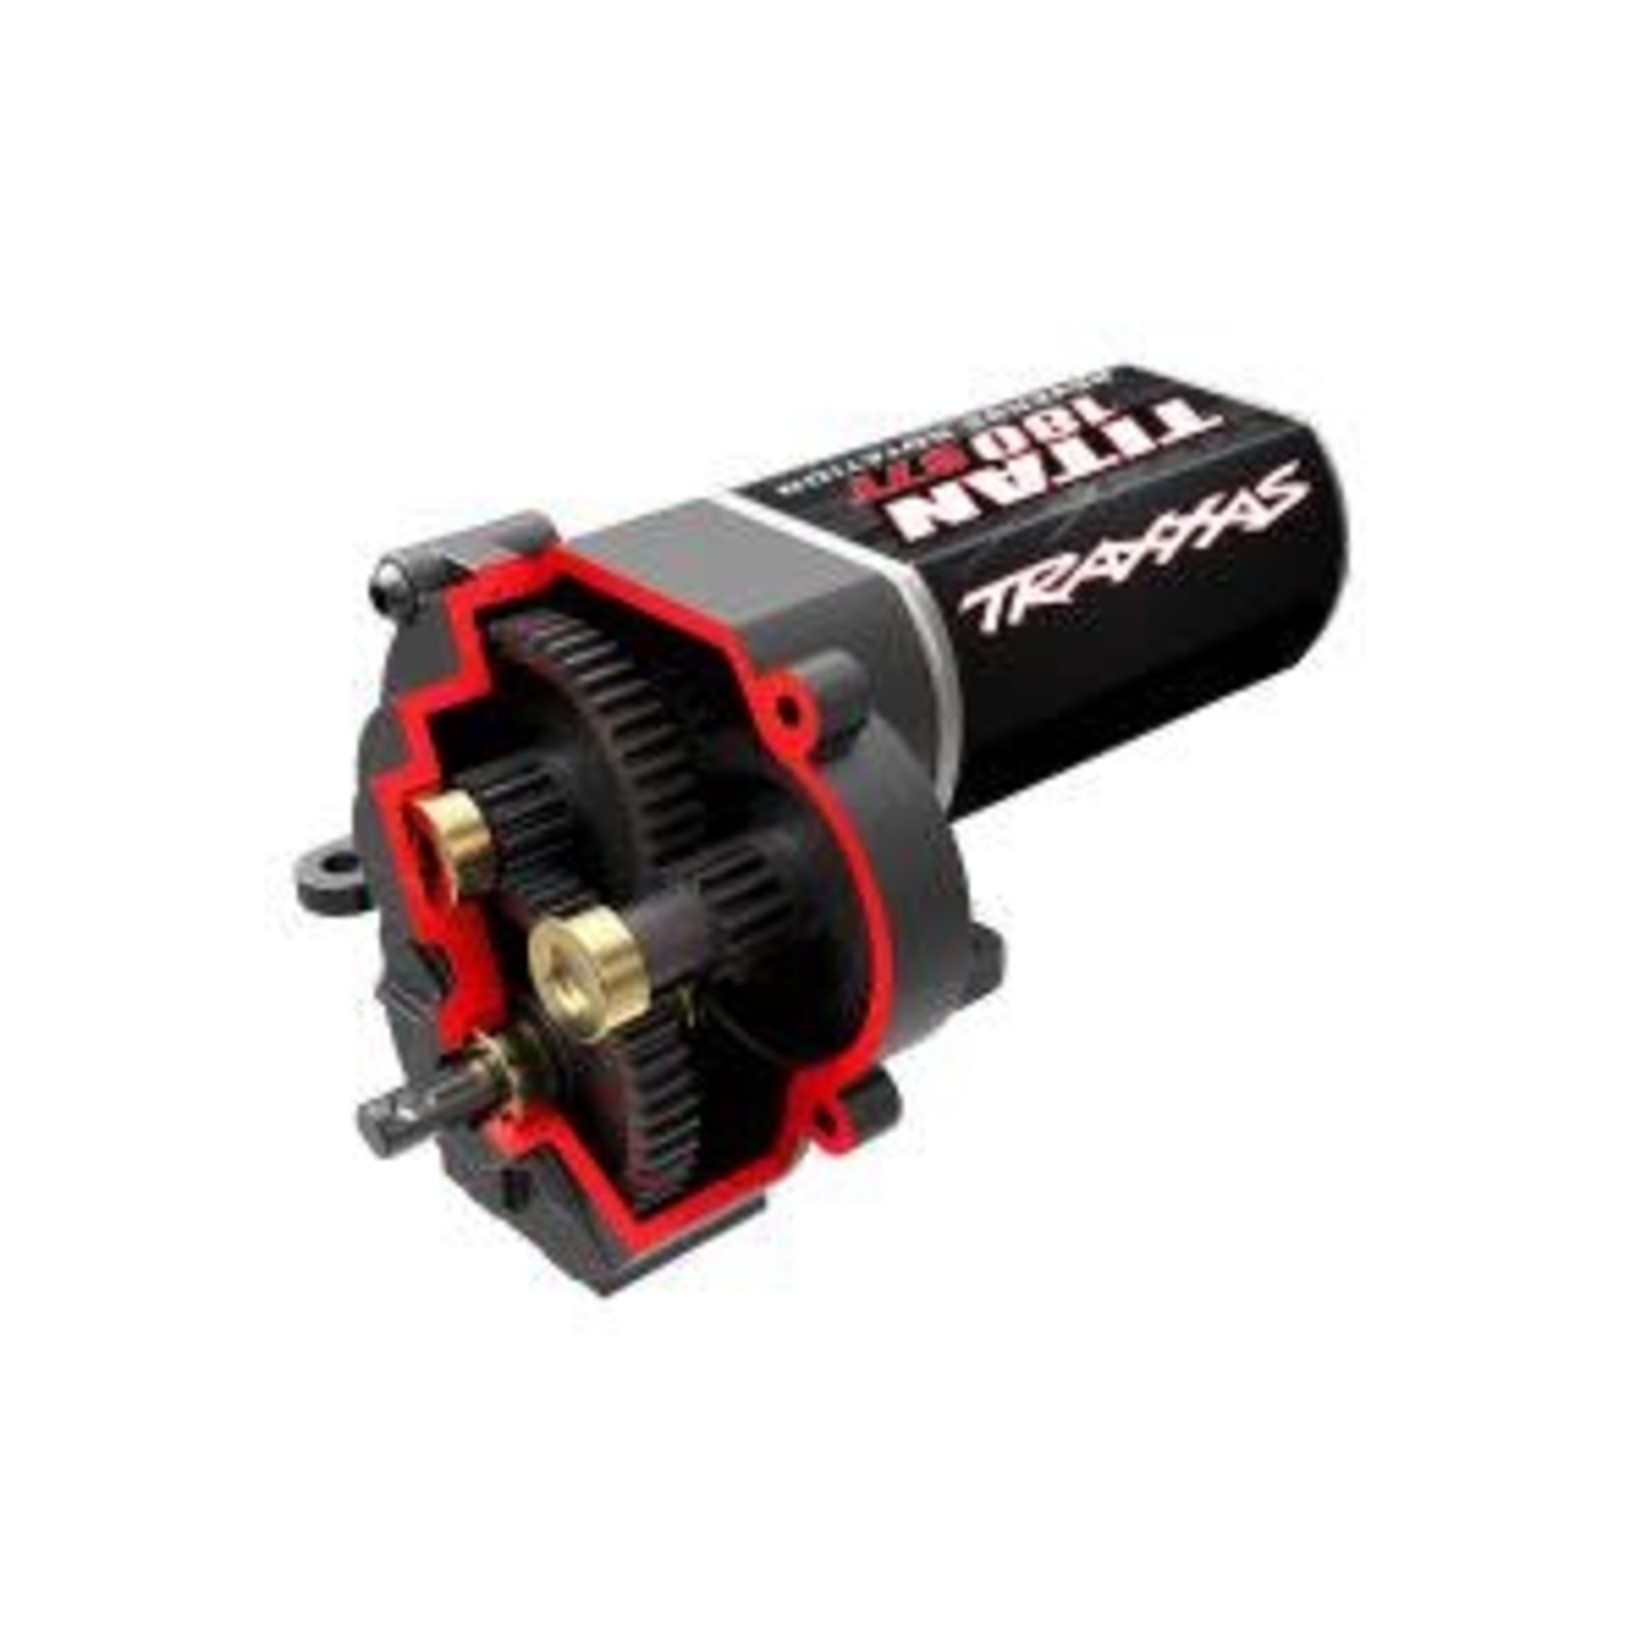 Traxxas 9791R  Transmission, complete (low range (crawl) gearing) (40.3:1 reduction ratio) (includes Titan® 87T motor)